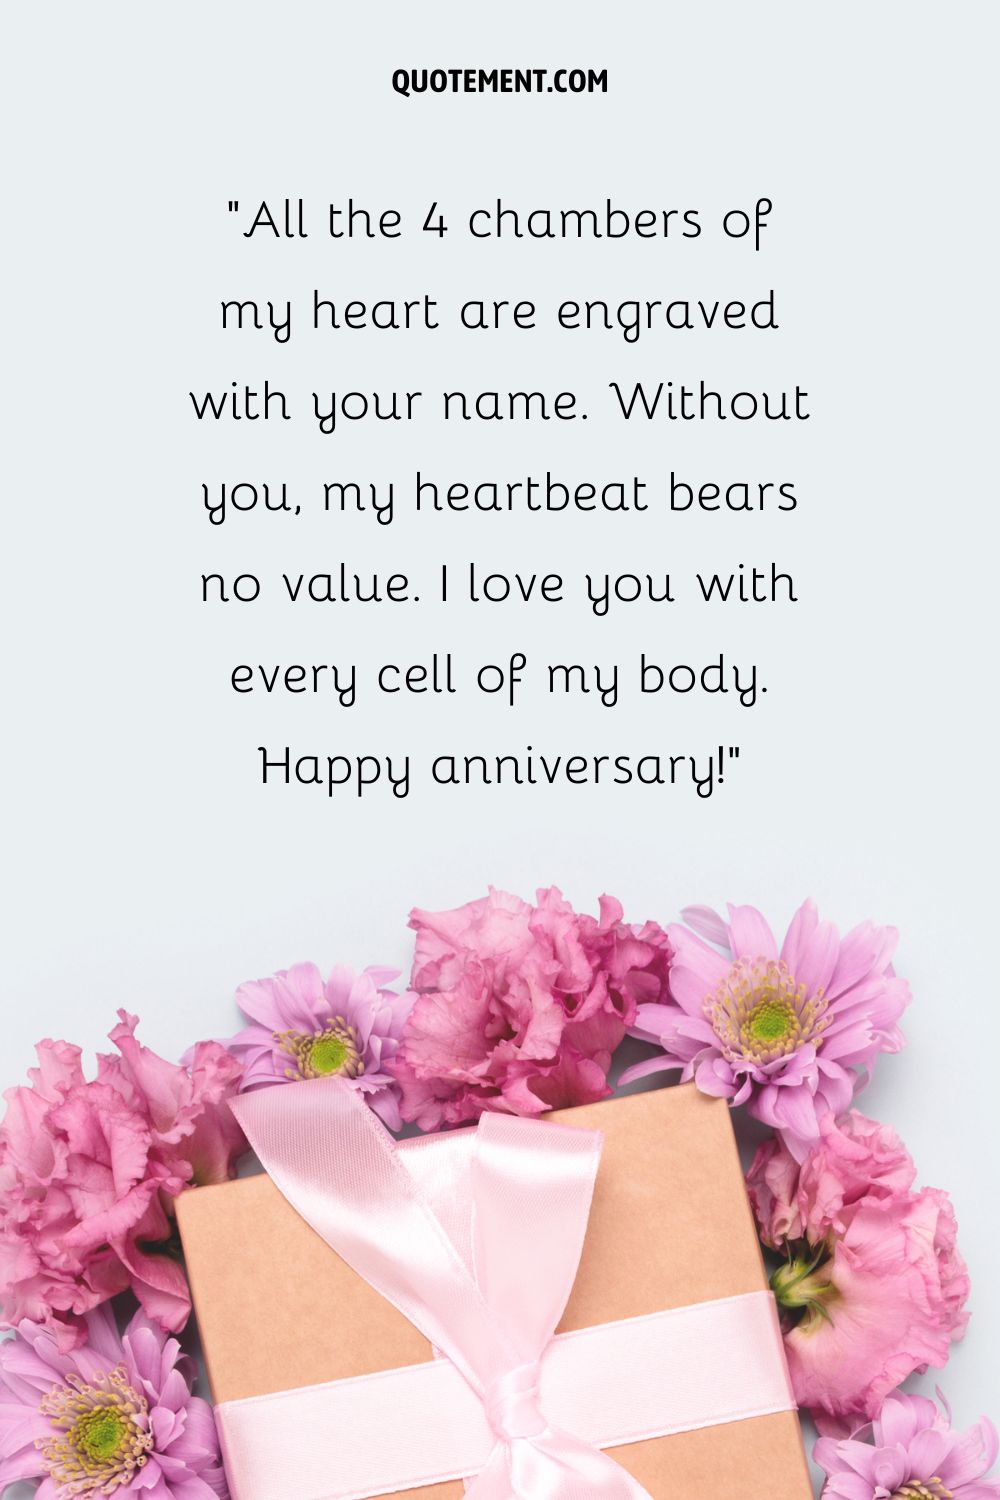 Pink flowers around a brown gift box representing the most beautiful 1st marriage anniversary wish
